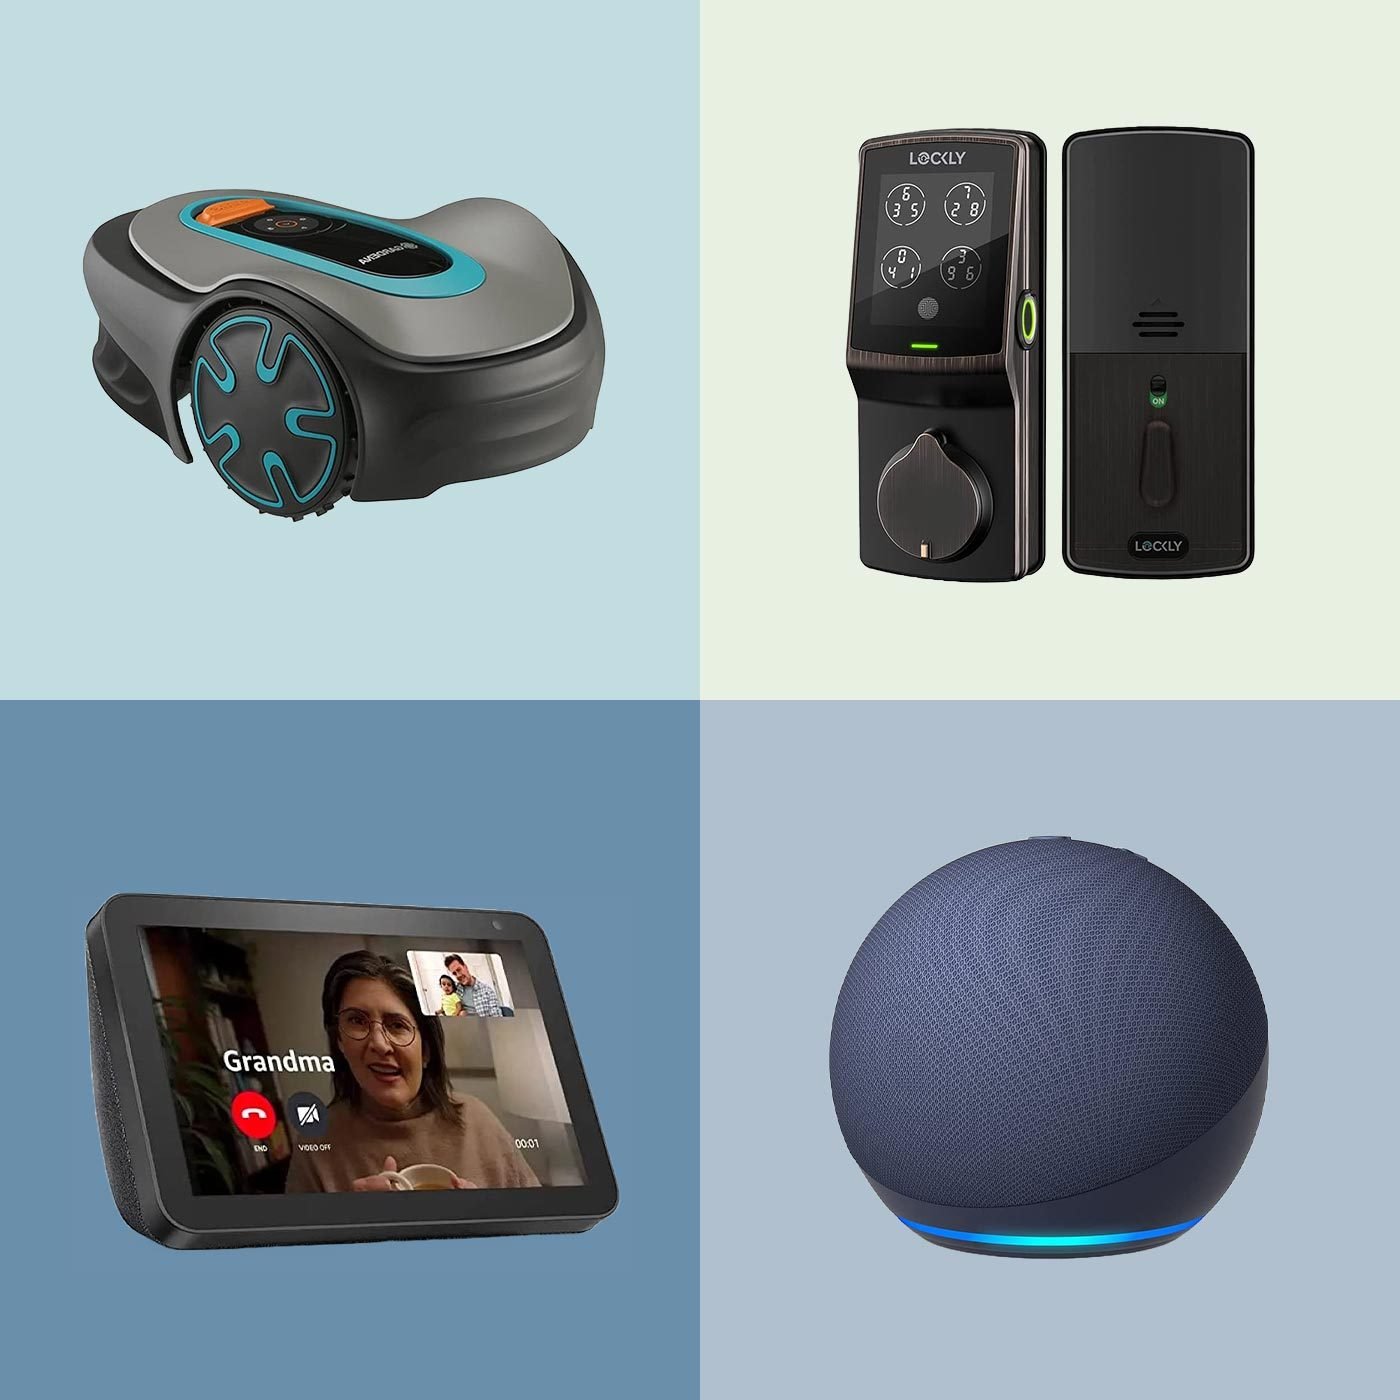 https://www.rd.com/wp-content/uploads/2019/10/The-Best-Smart-Home-Devices-That-Are-Worth-Every-Penny_ft.jpg